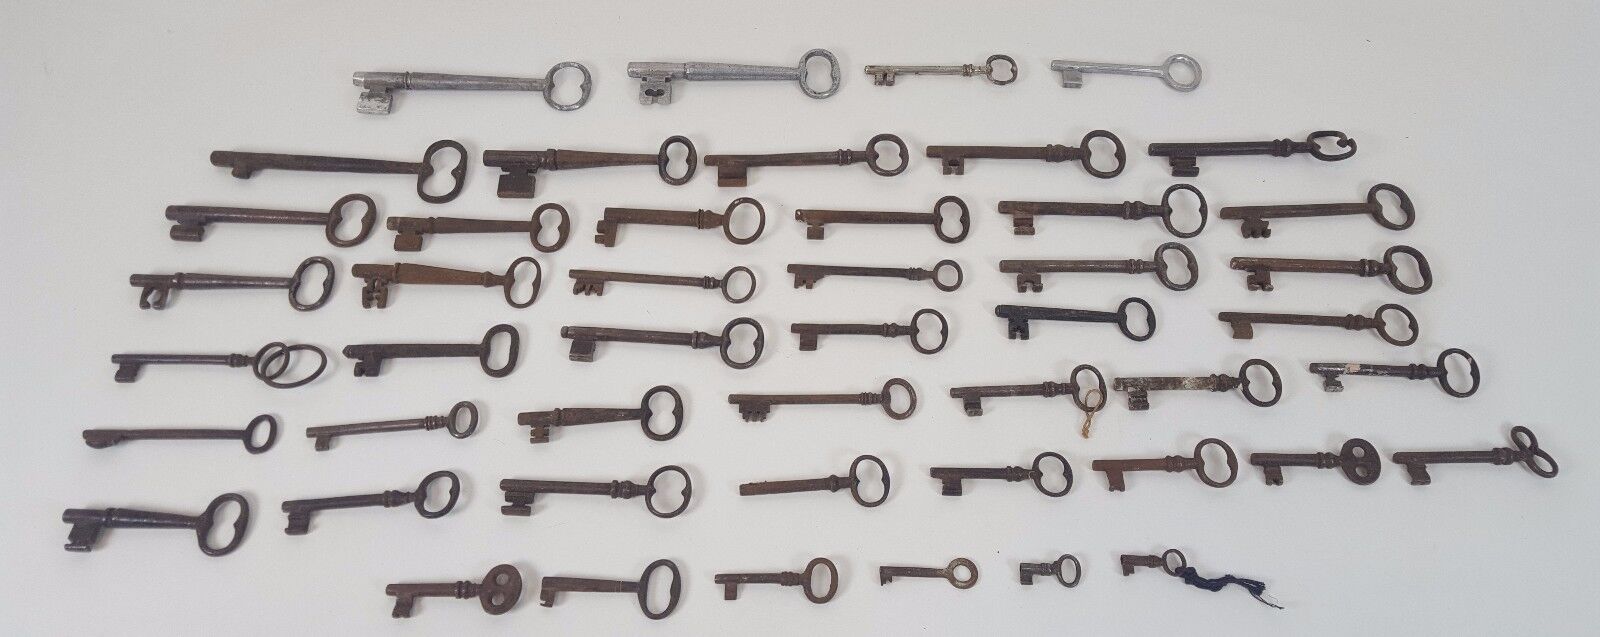 COLLECTION OF 48 KEYS ANTIQUE IRON AND ALUMINUM. SPAIN. FROM THE 17TH CENTURY TO